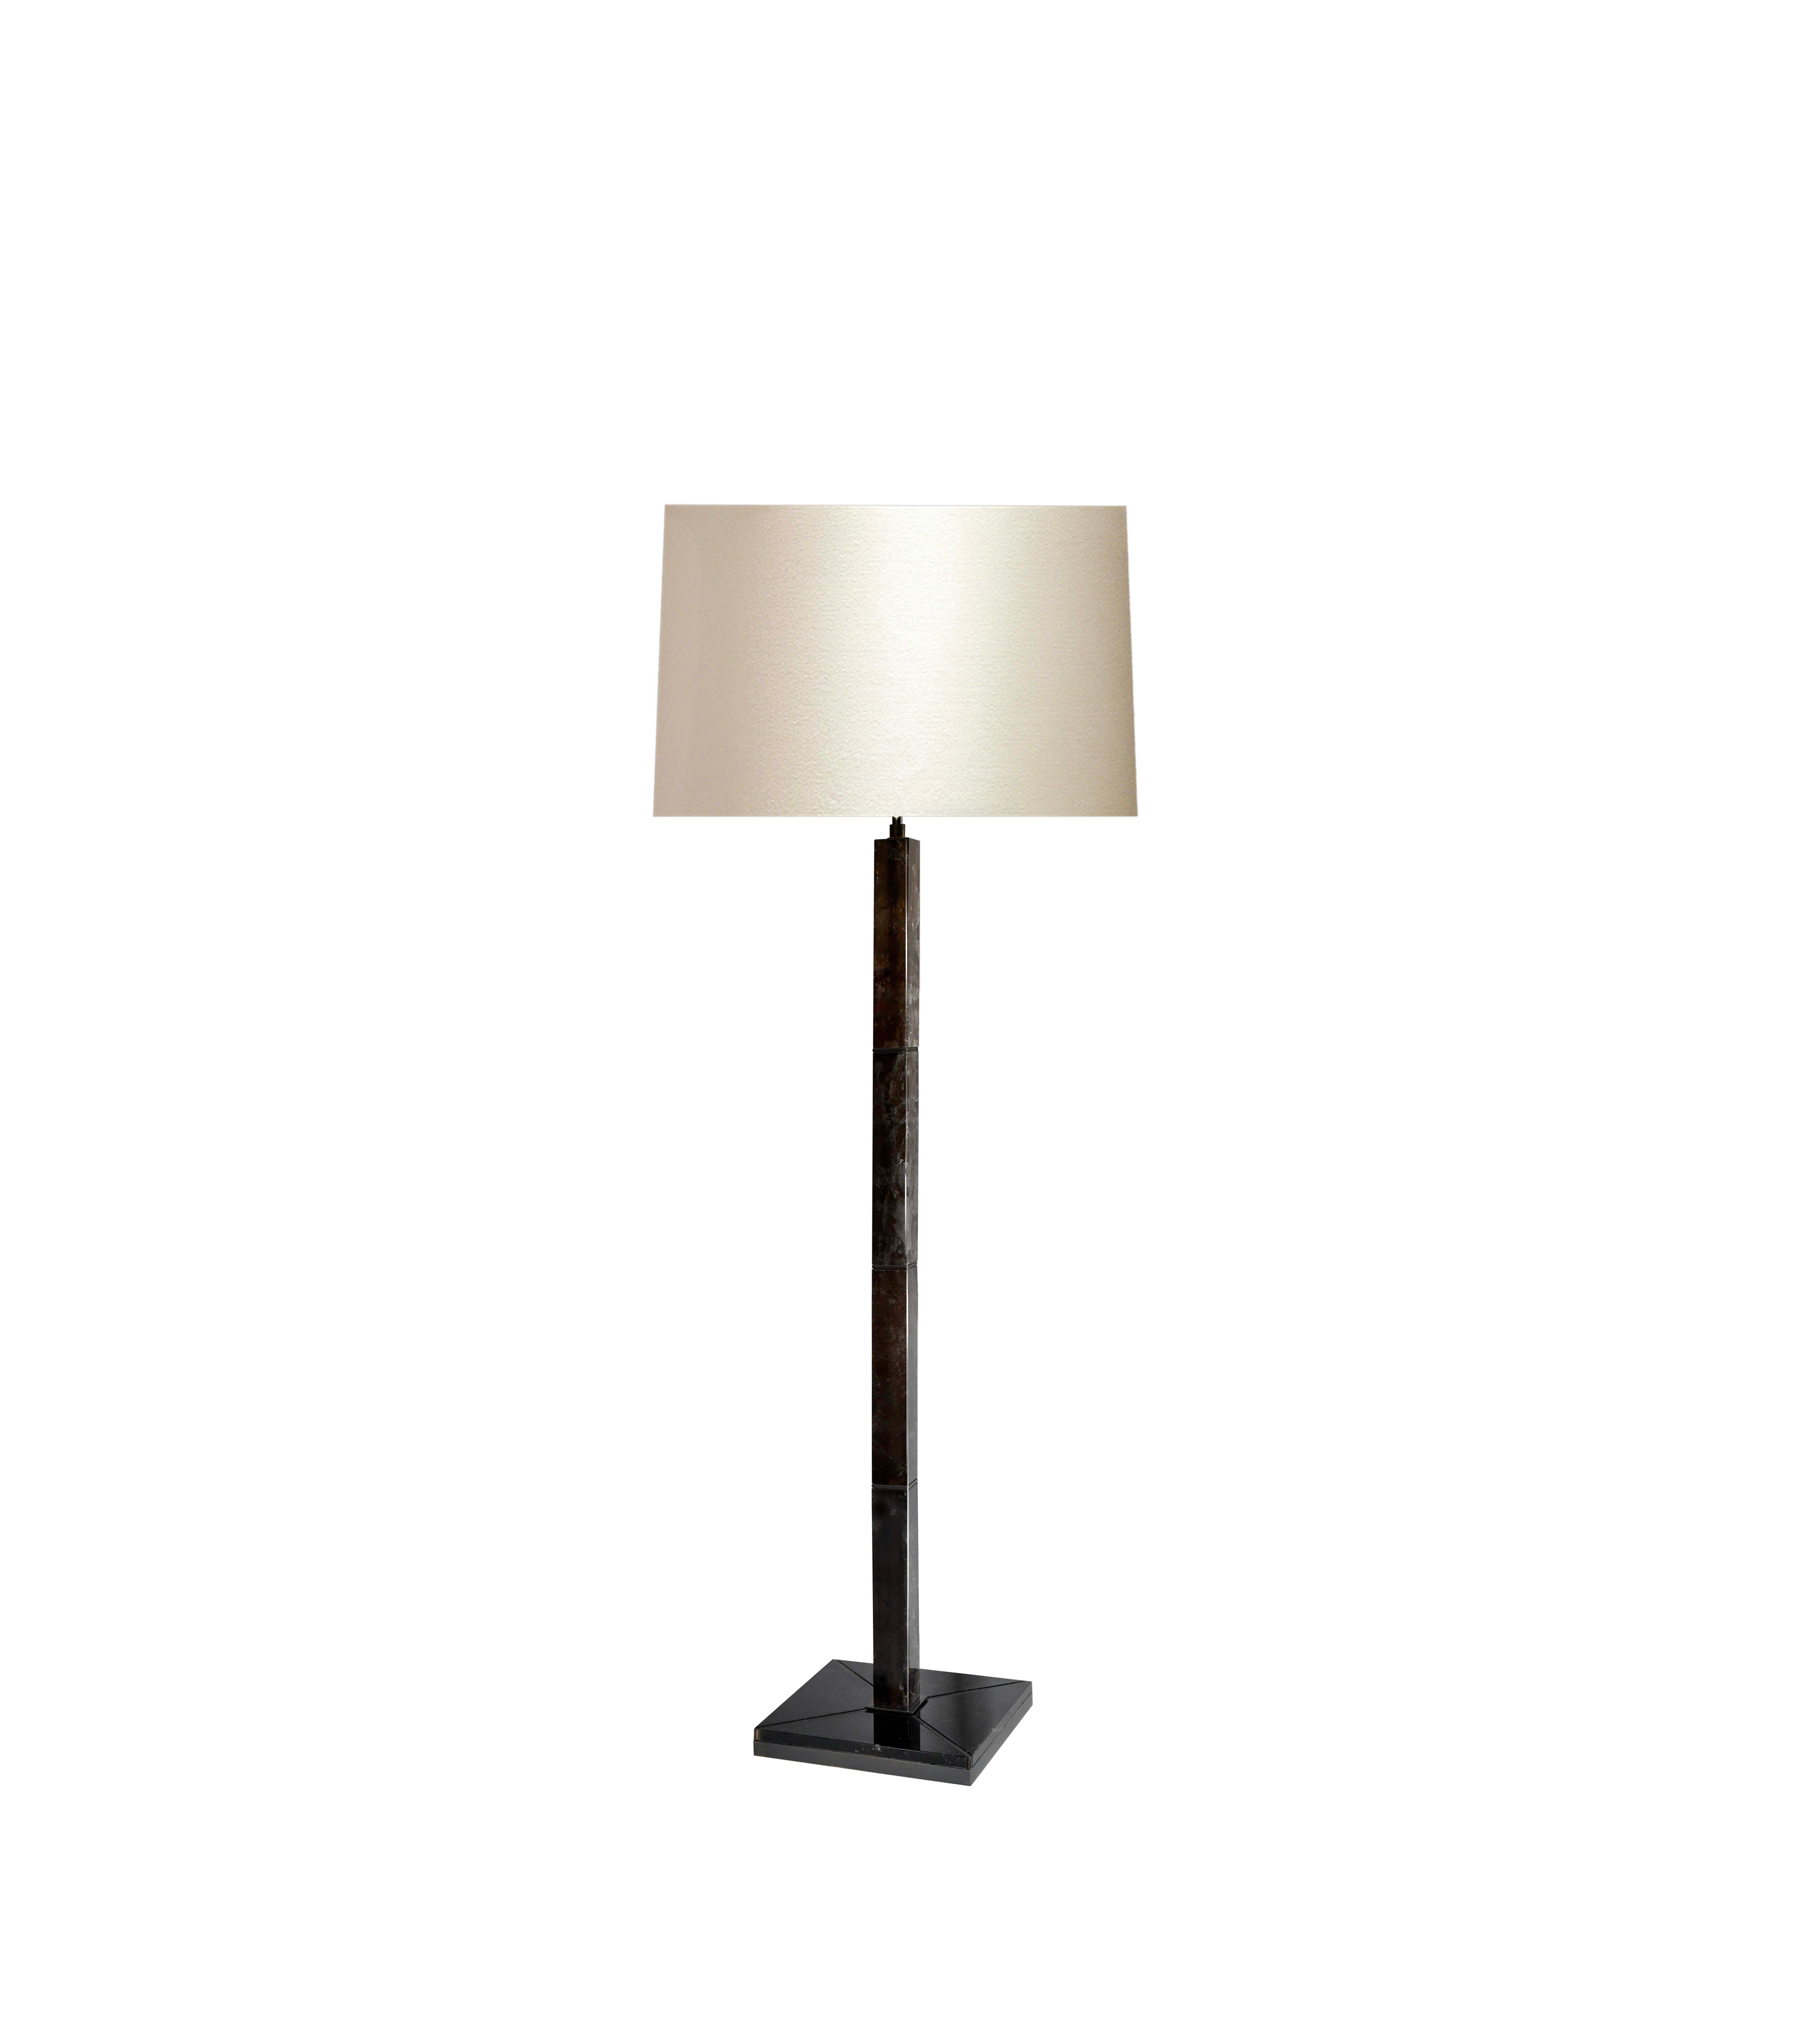 Square sectional column dark smoky rock crystal floor lamp with dark brass finish. Created by Phoenix Gallery, NYC.
To the top of rock crystal: 54